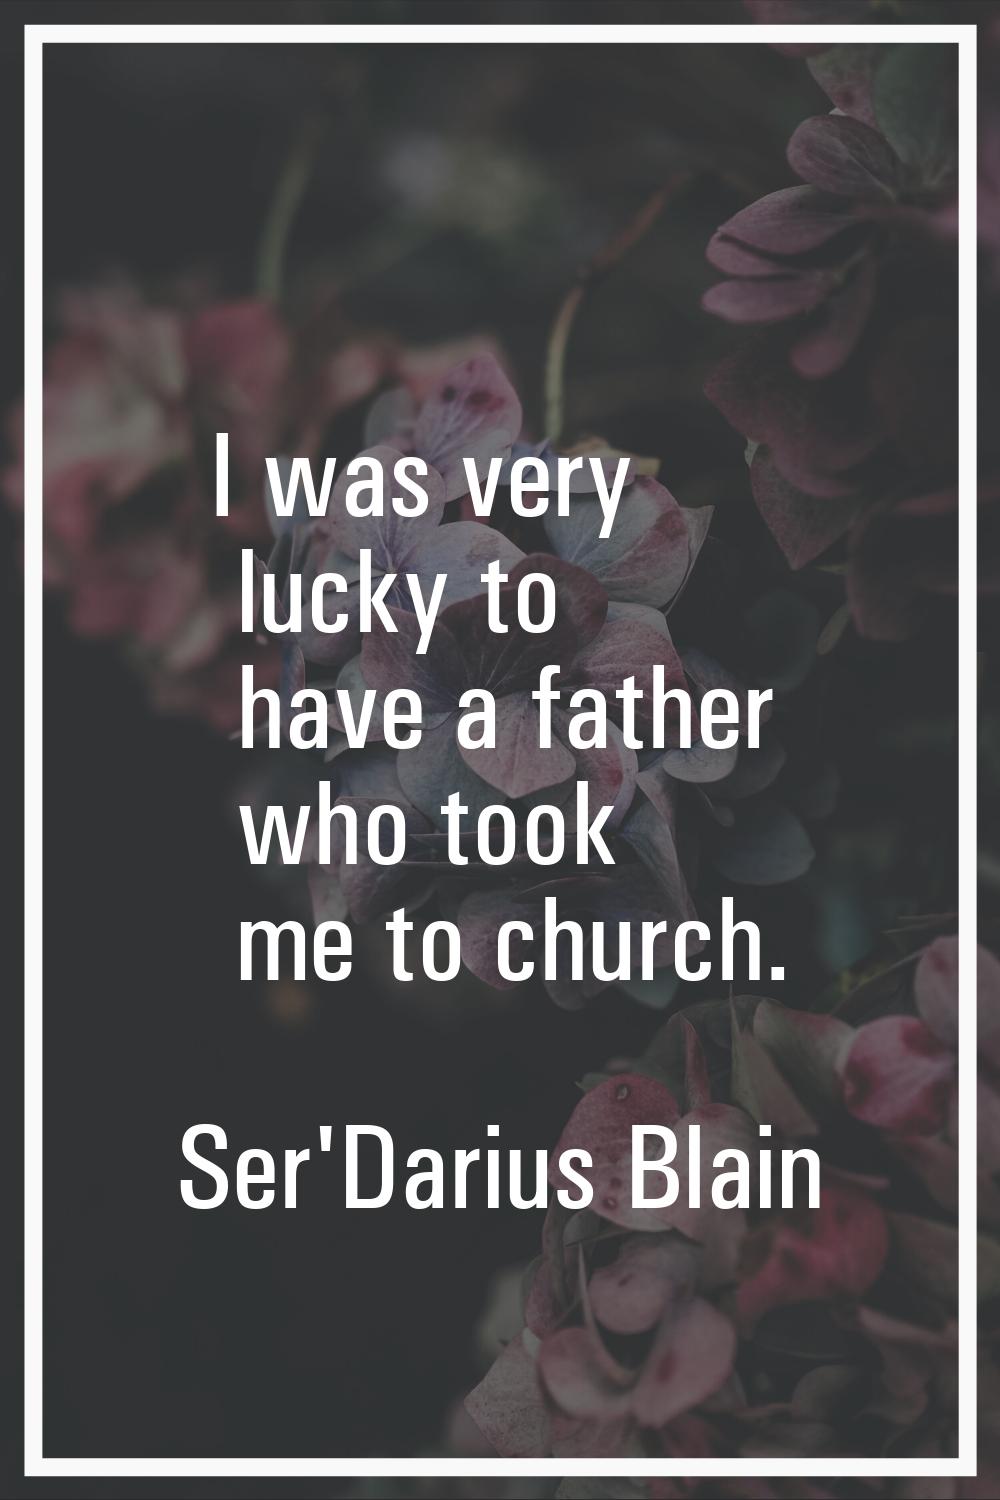 I was very lucky to have a father who took me to church.